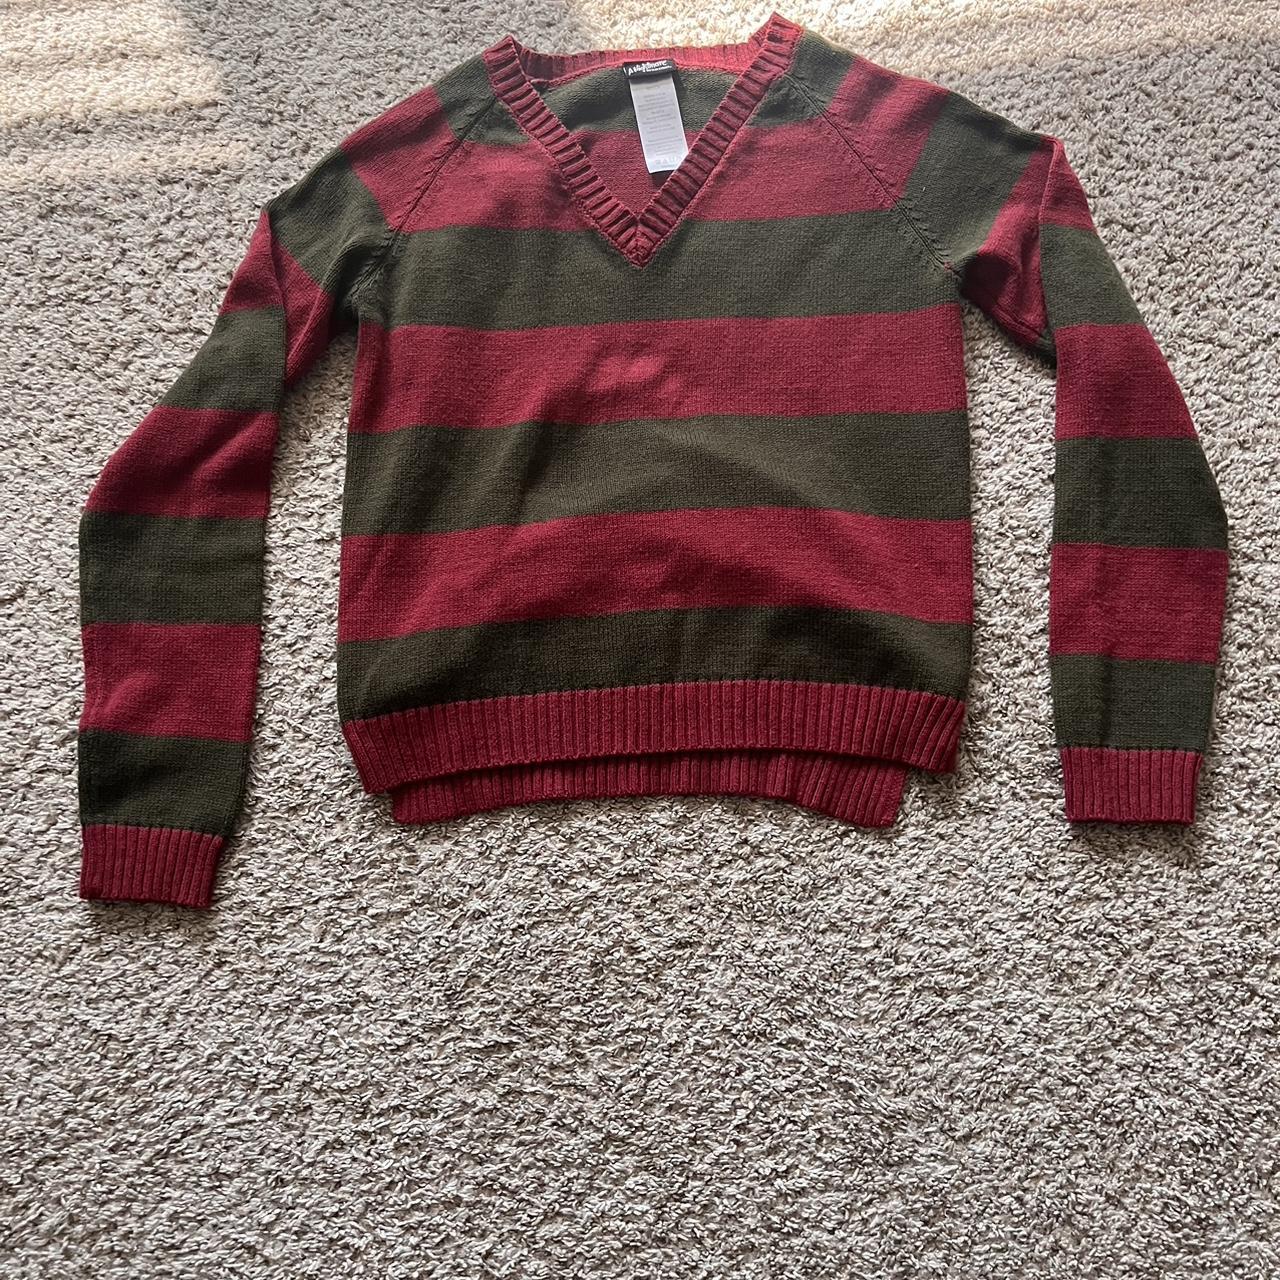 Freddy Krueger sweater Perfect condition Size... - Depop